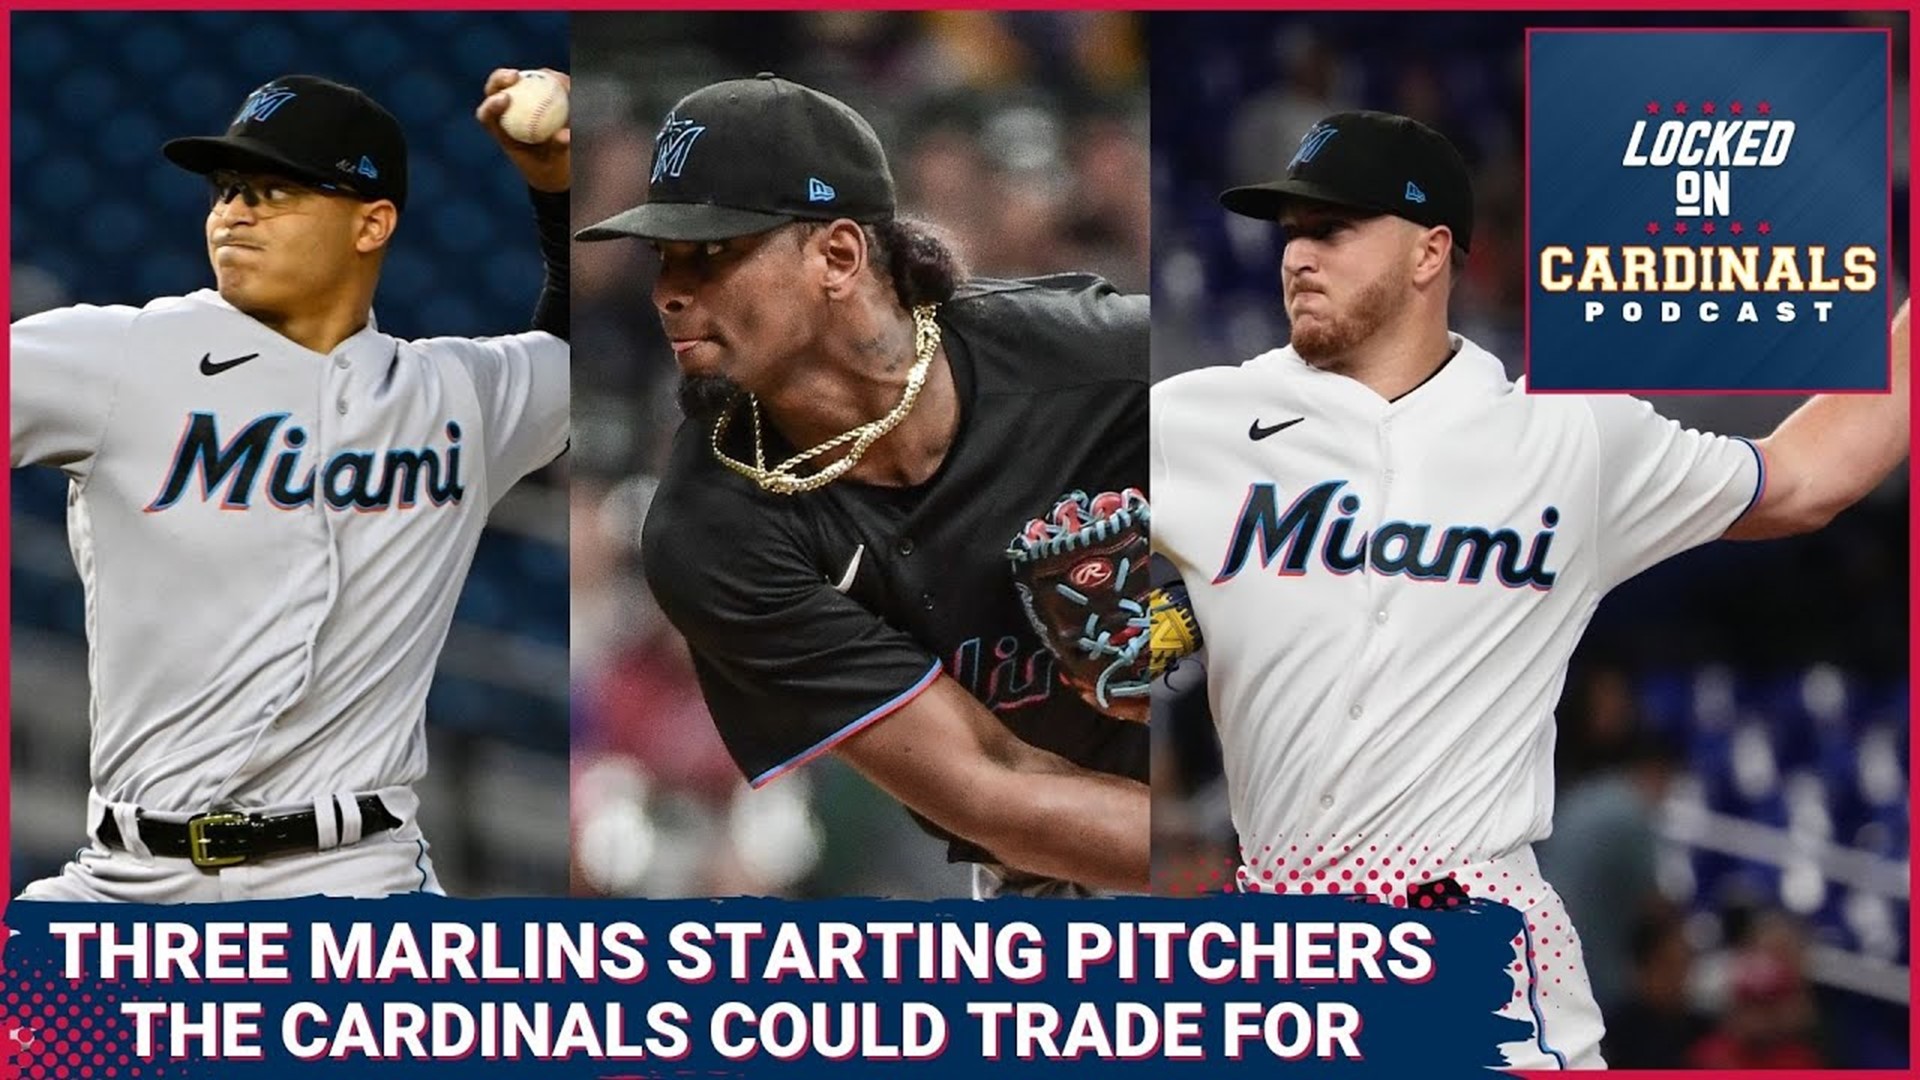 The Miami Marlins and the St. Louis Cardinals appear to be a good match for a trade. Pablo Lopez is the name most mentioned but other starters could be targets.